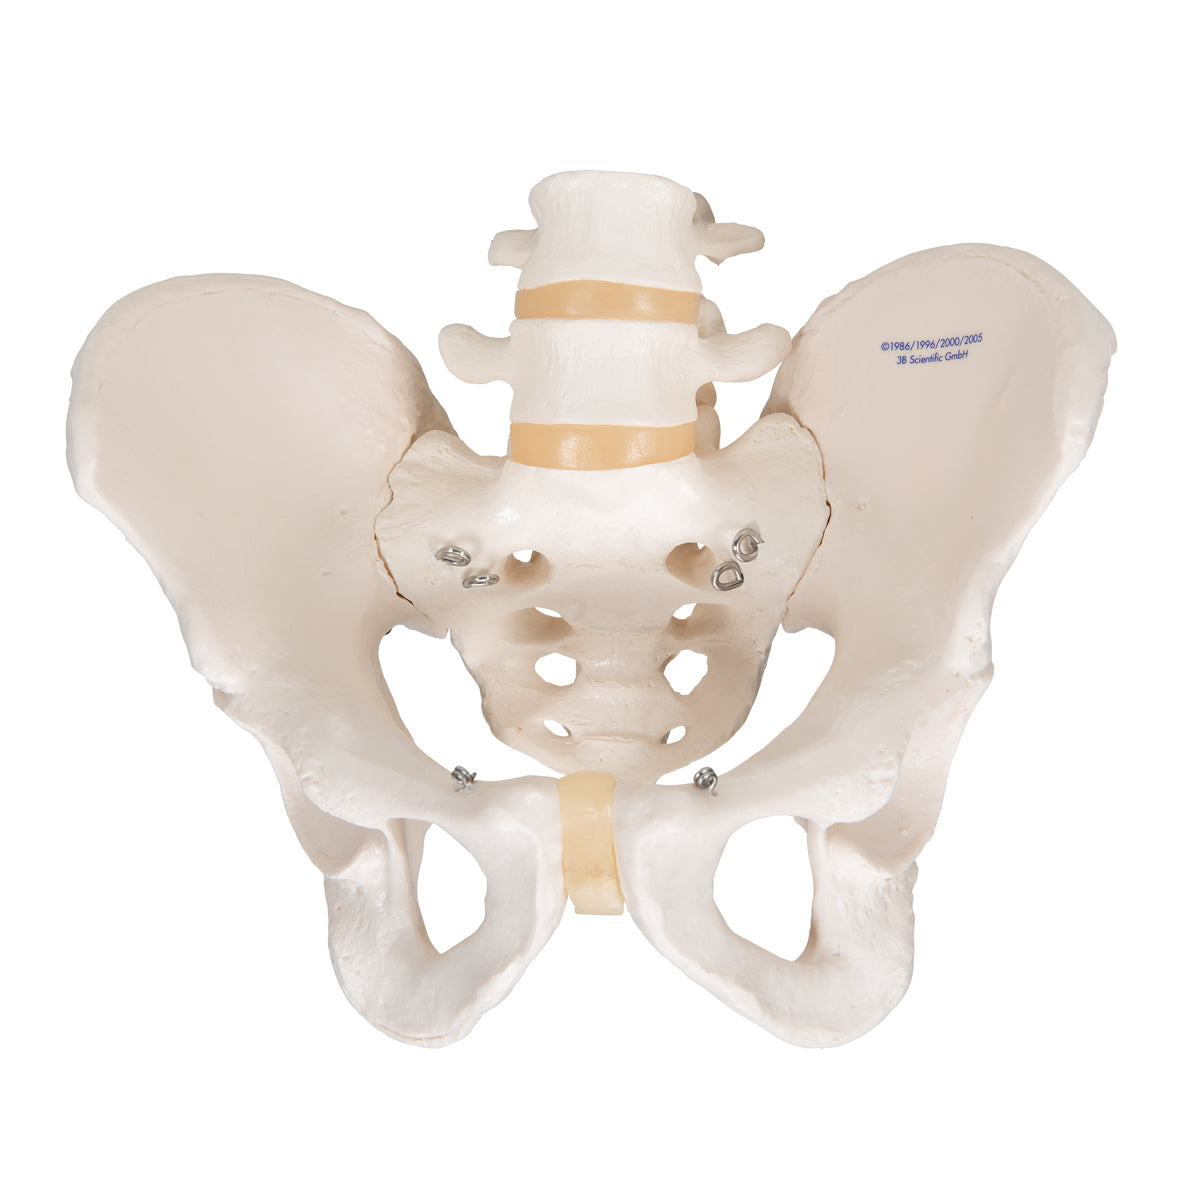 Pelvic model showing bones and joints in the man's pelvis